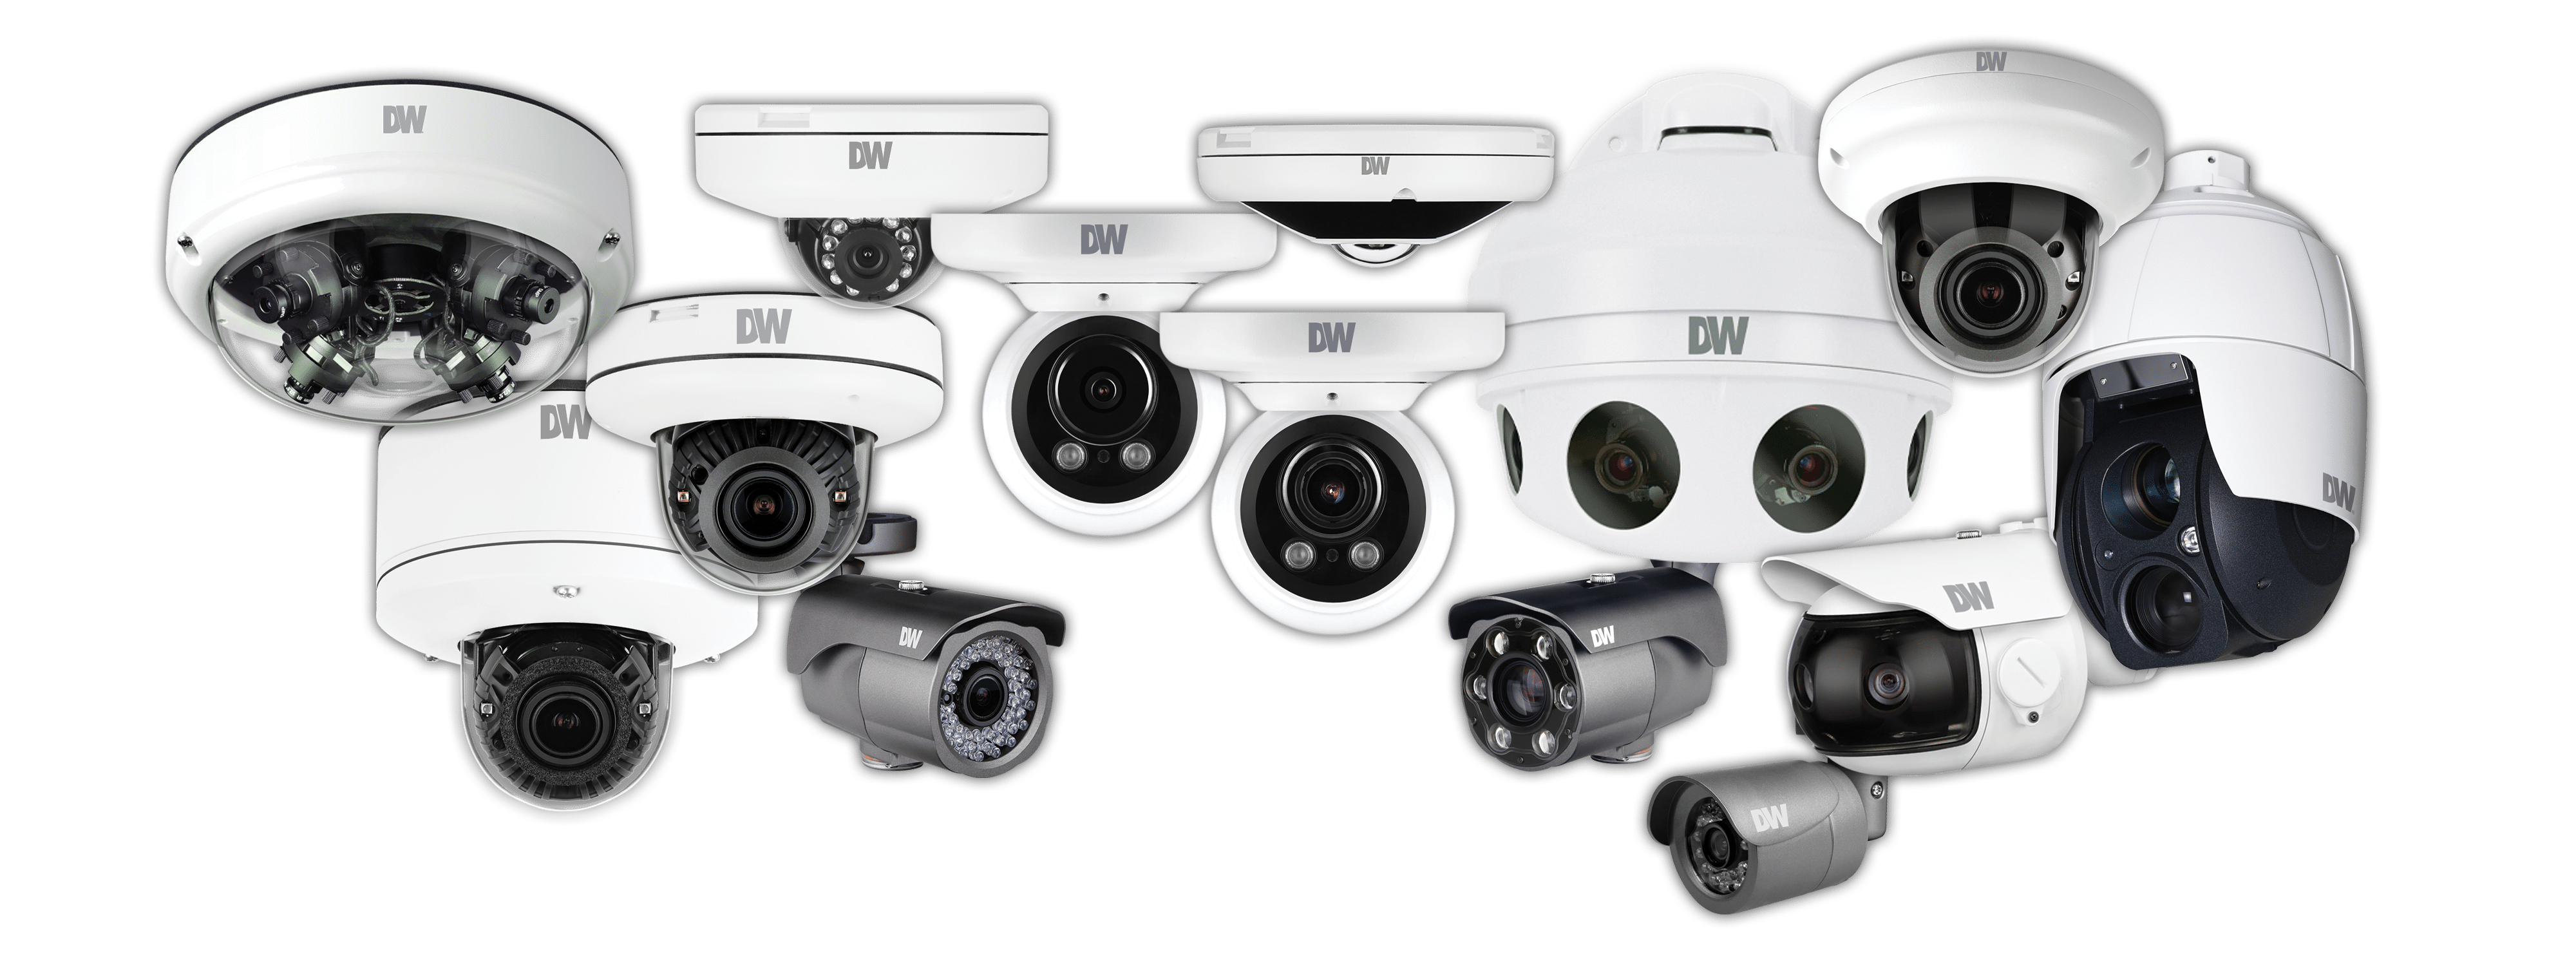 Digital watch dog camera systems home and business security